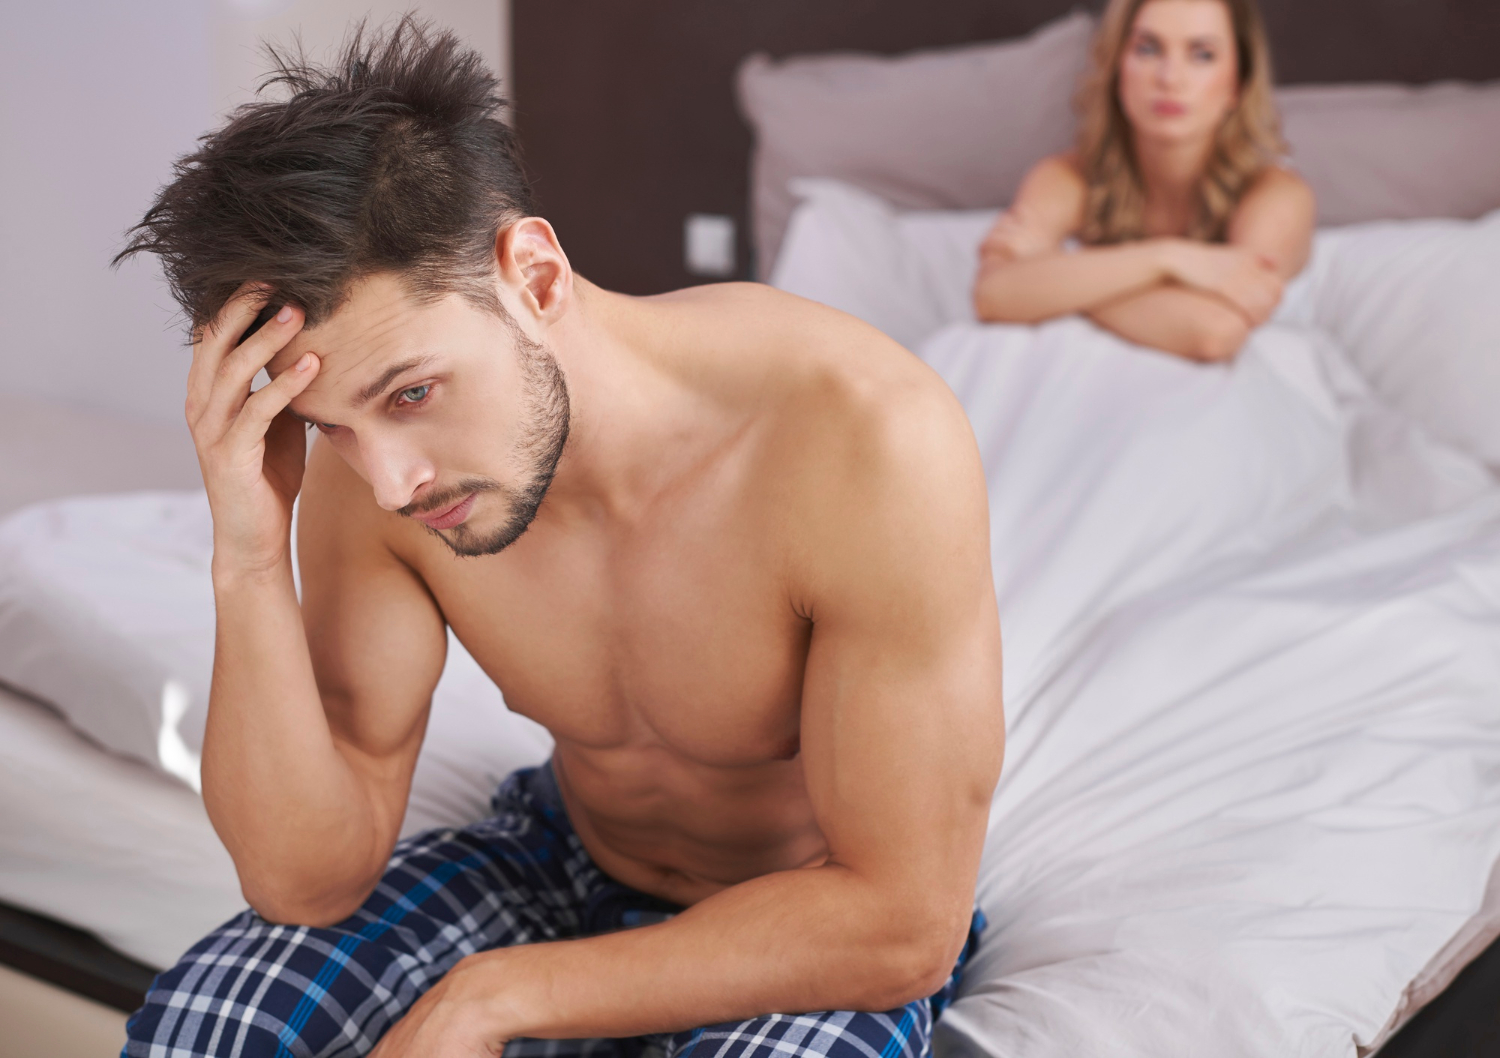 Common Misconceptions Surrounding Male Sexuality